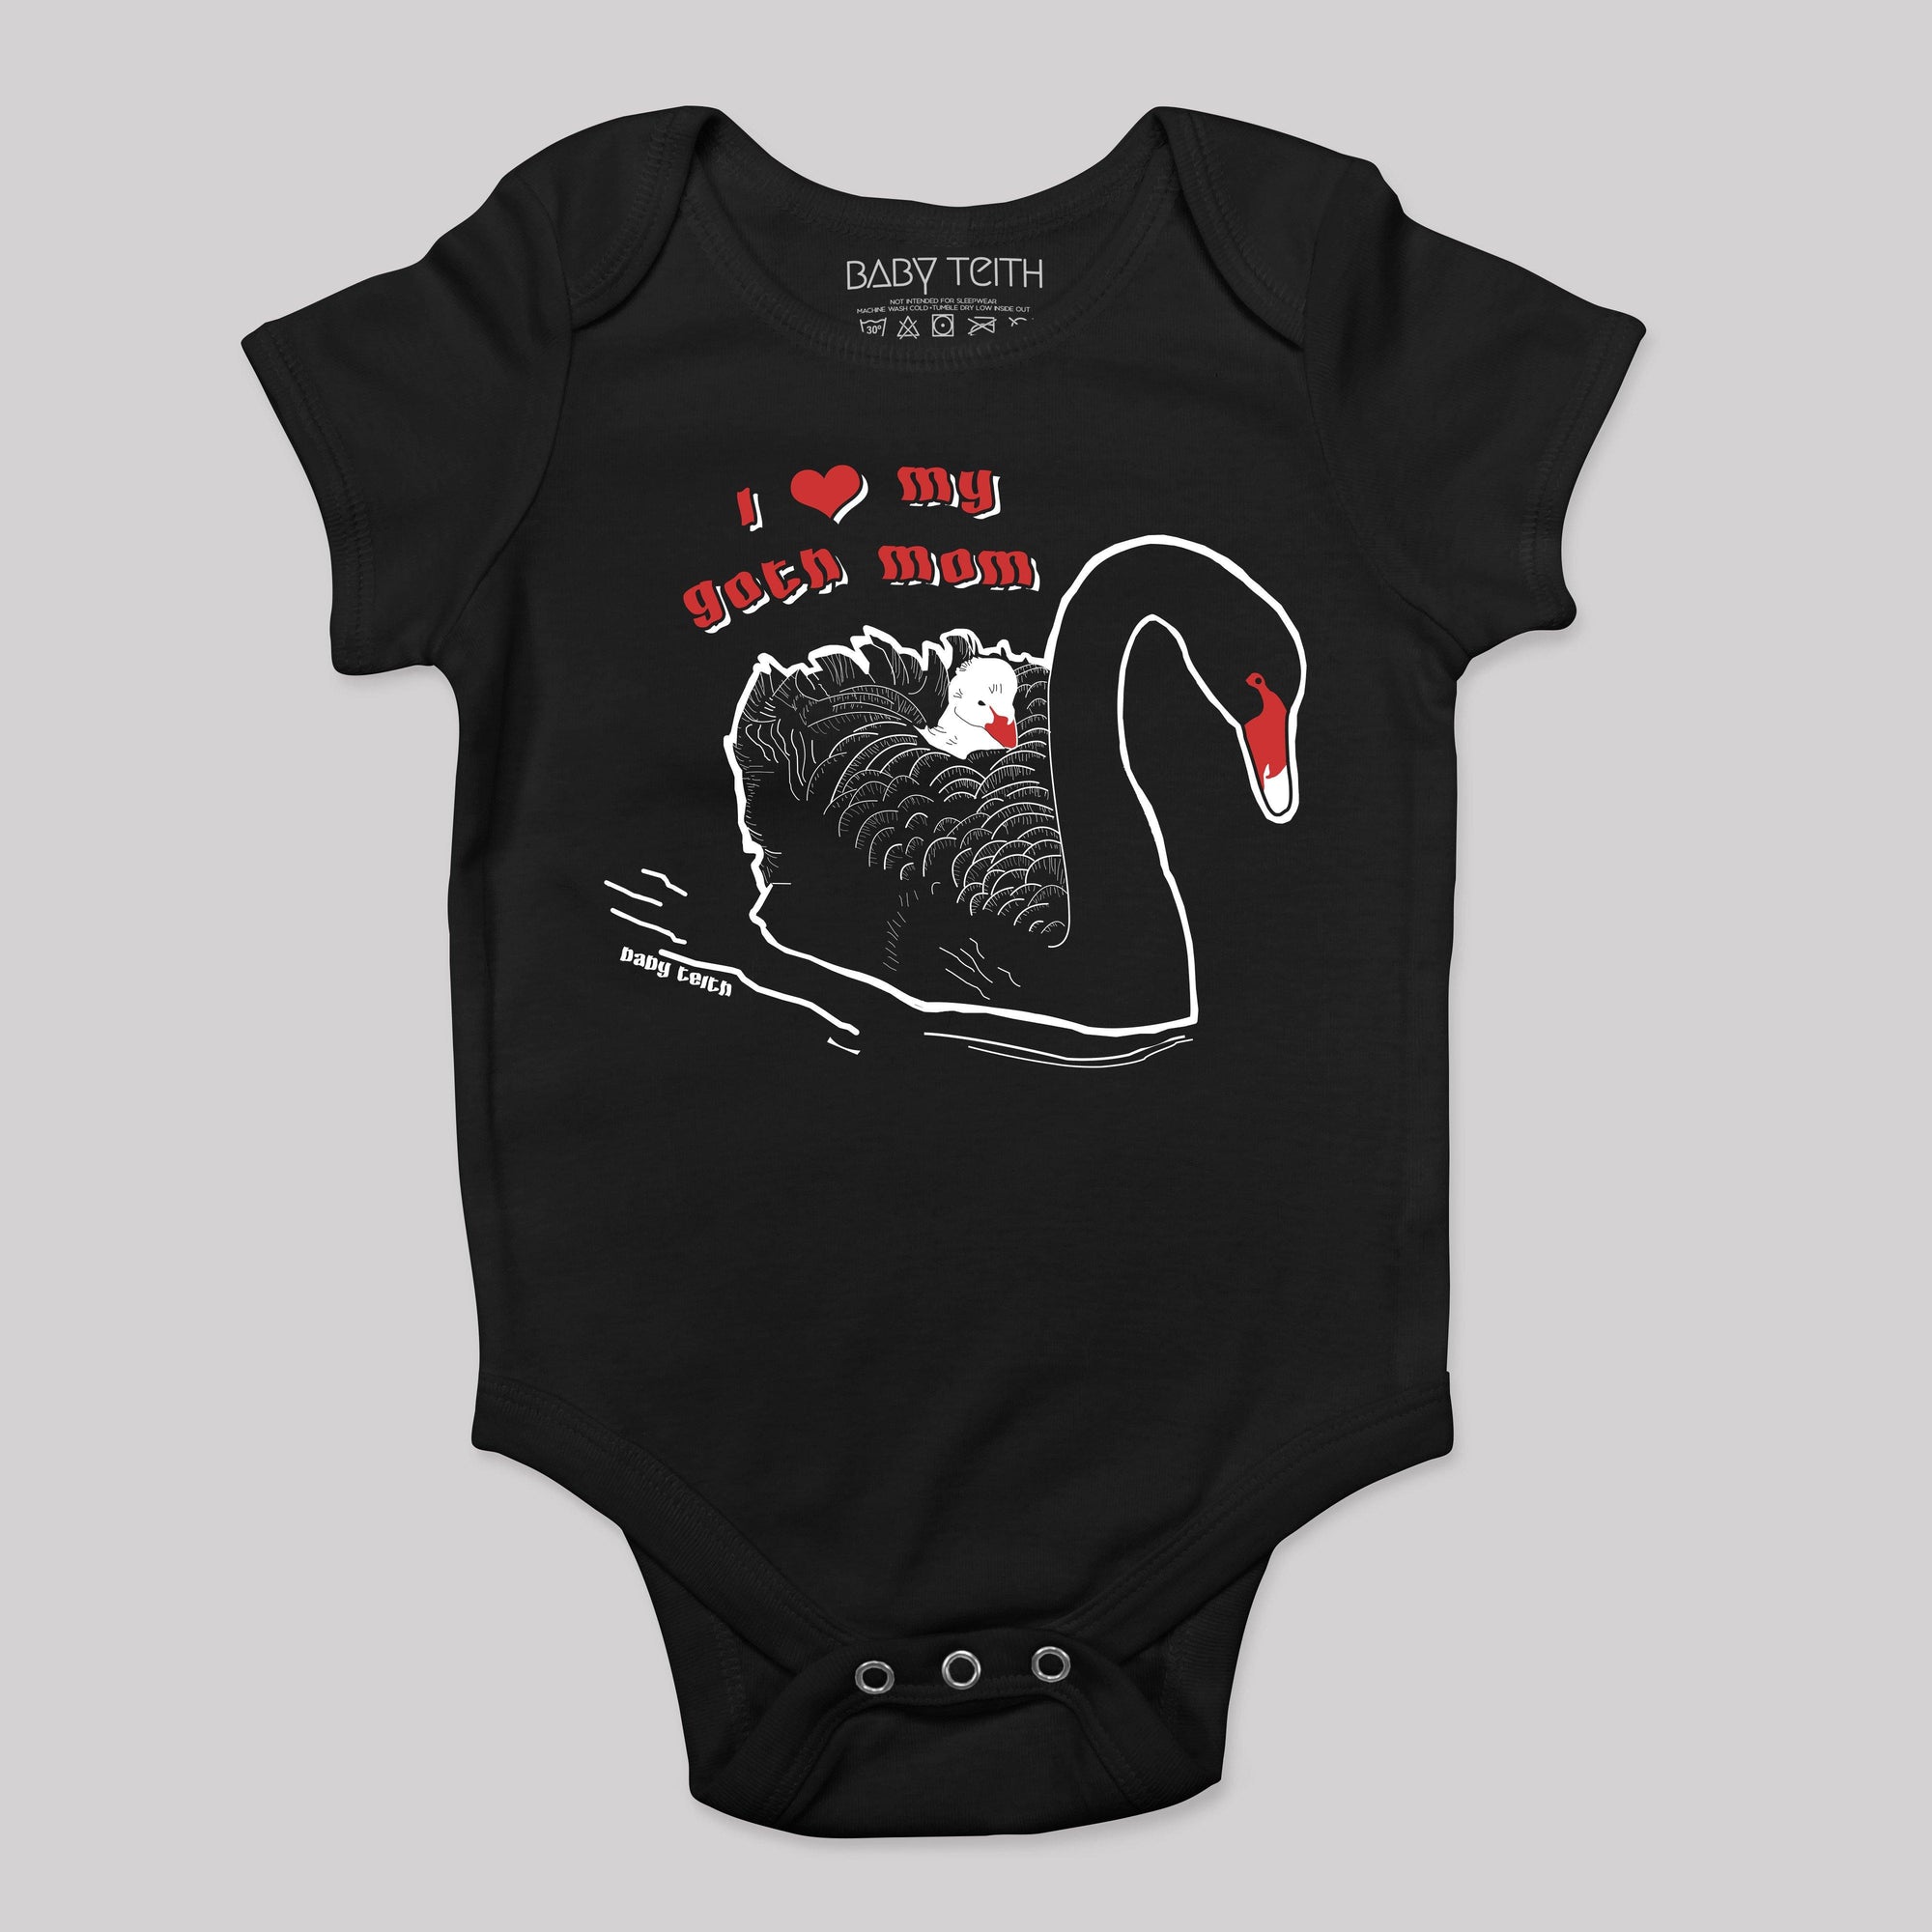 "I Love My Goth Mom" Bodysuit for Babies - Baby Teith